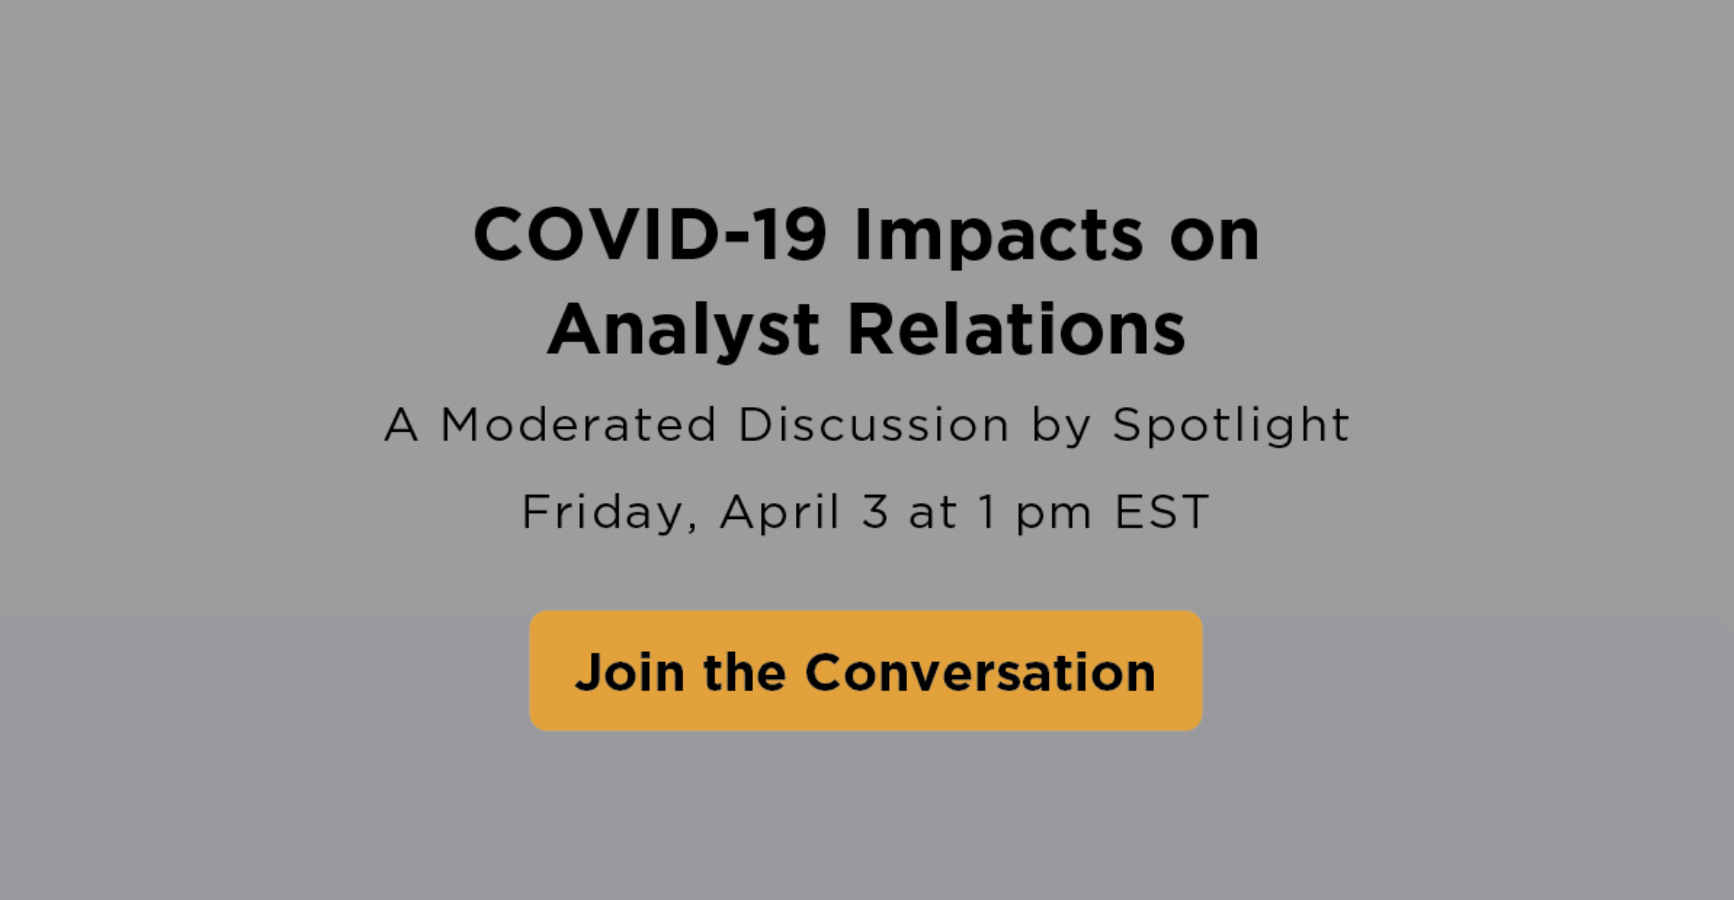 COVID-19 impacts on analyst relations